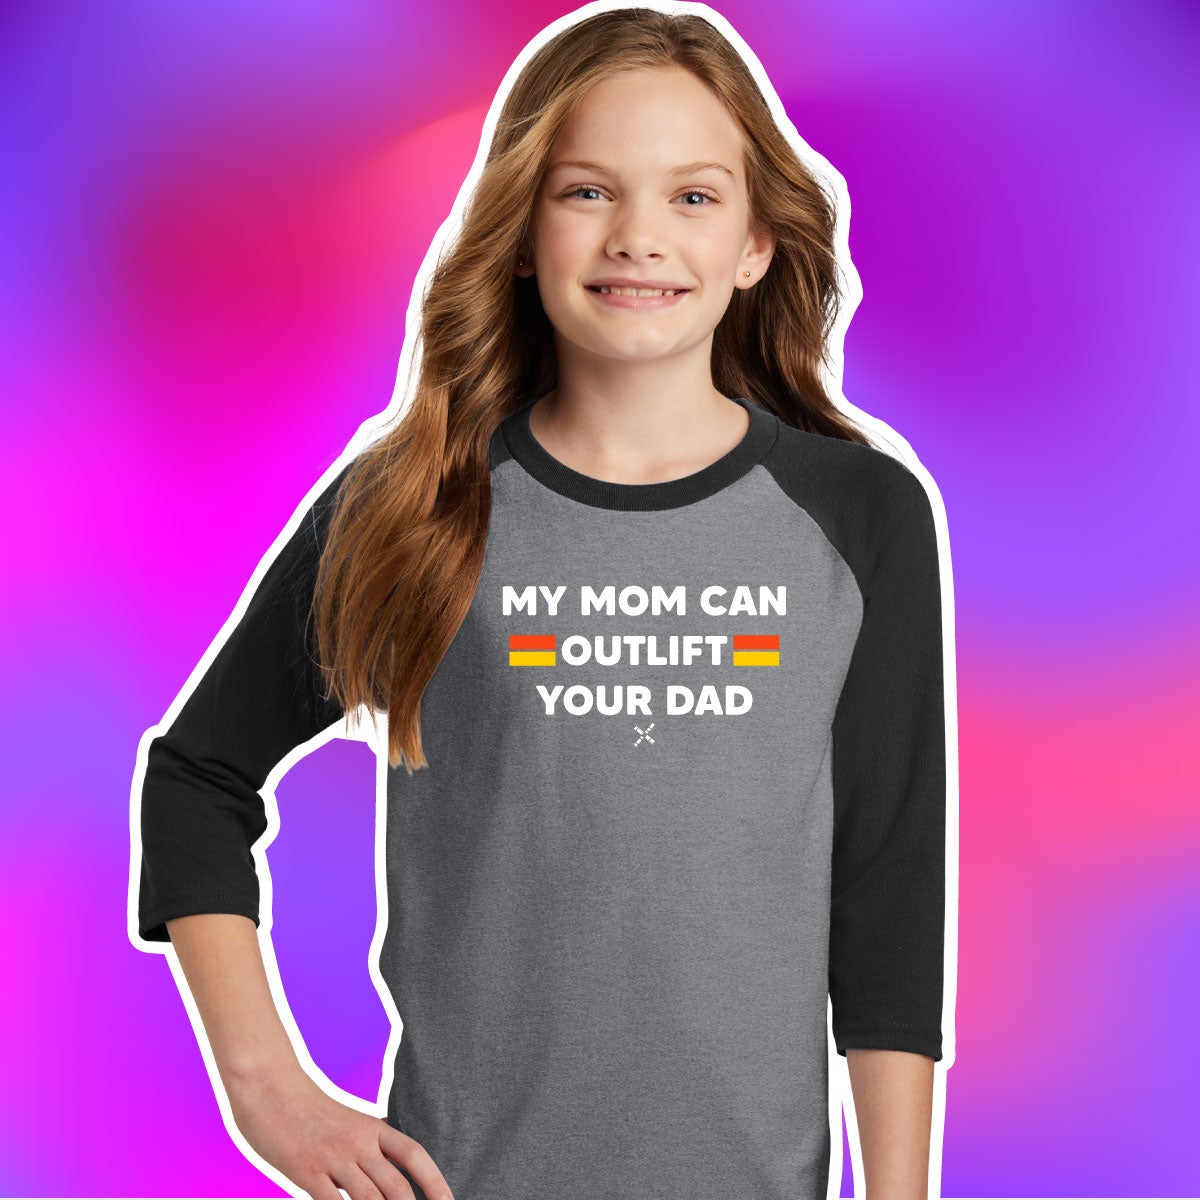 My Mom Can Outlift Your Dad Youth 3/4-Sleeve Raglan Tee